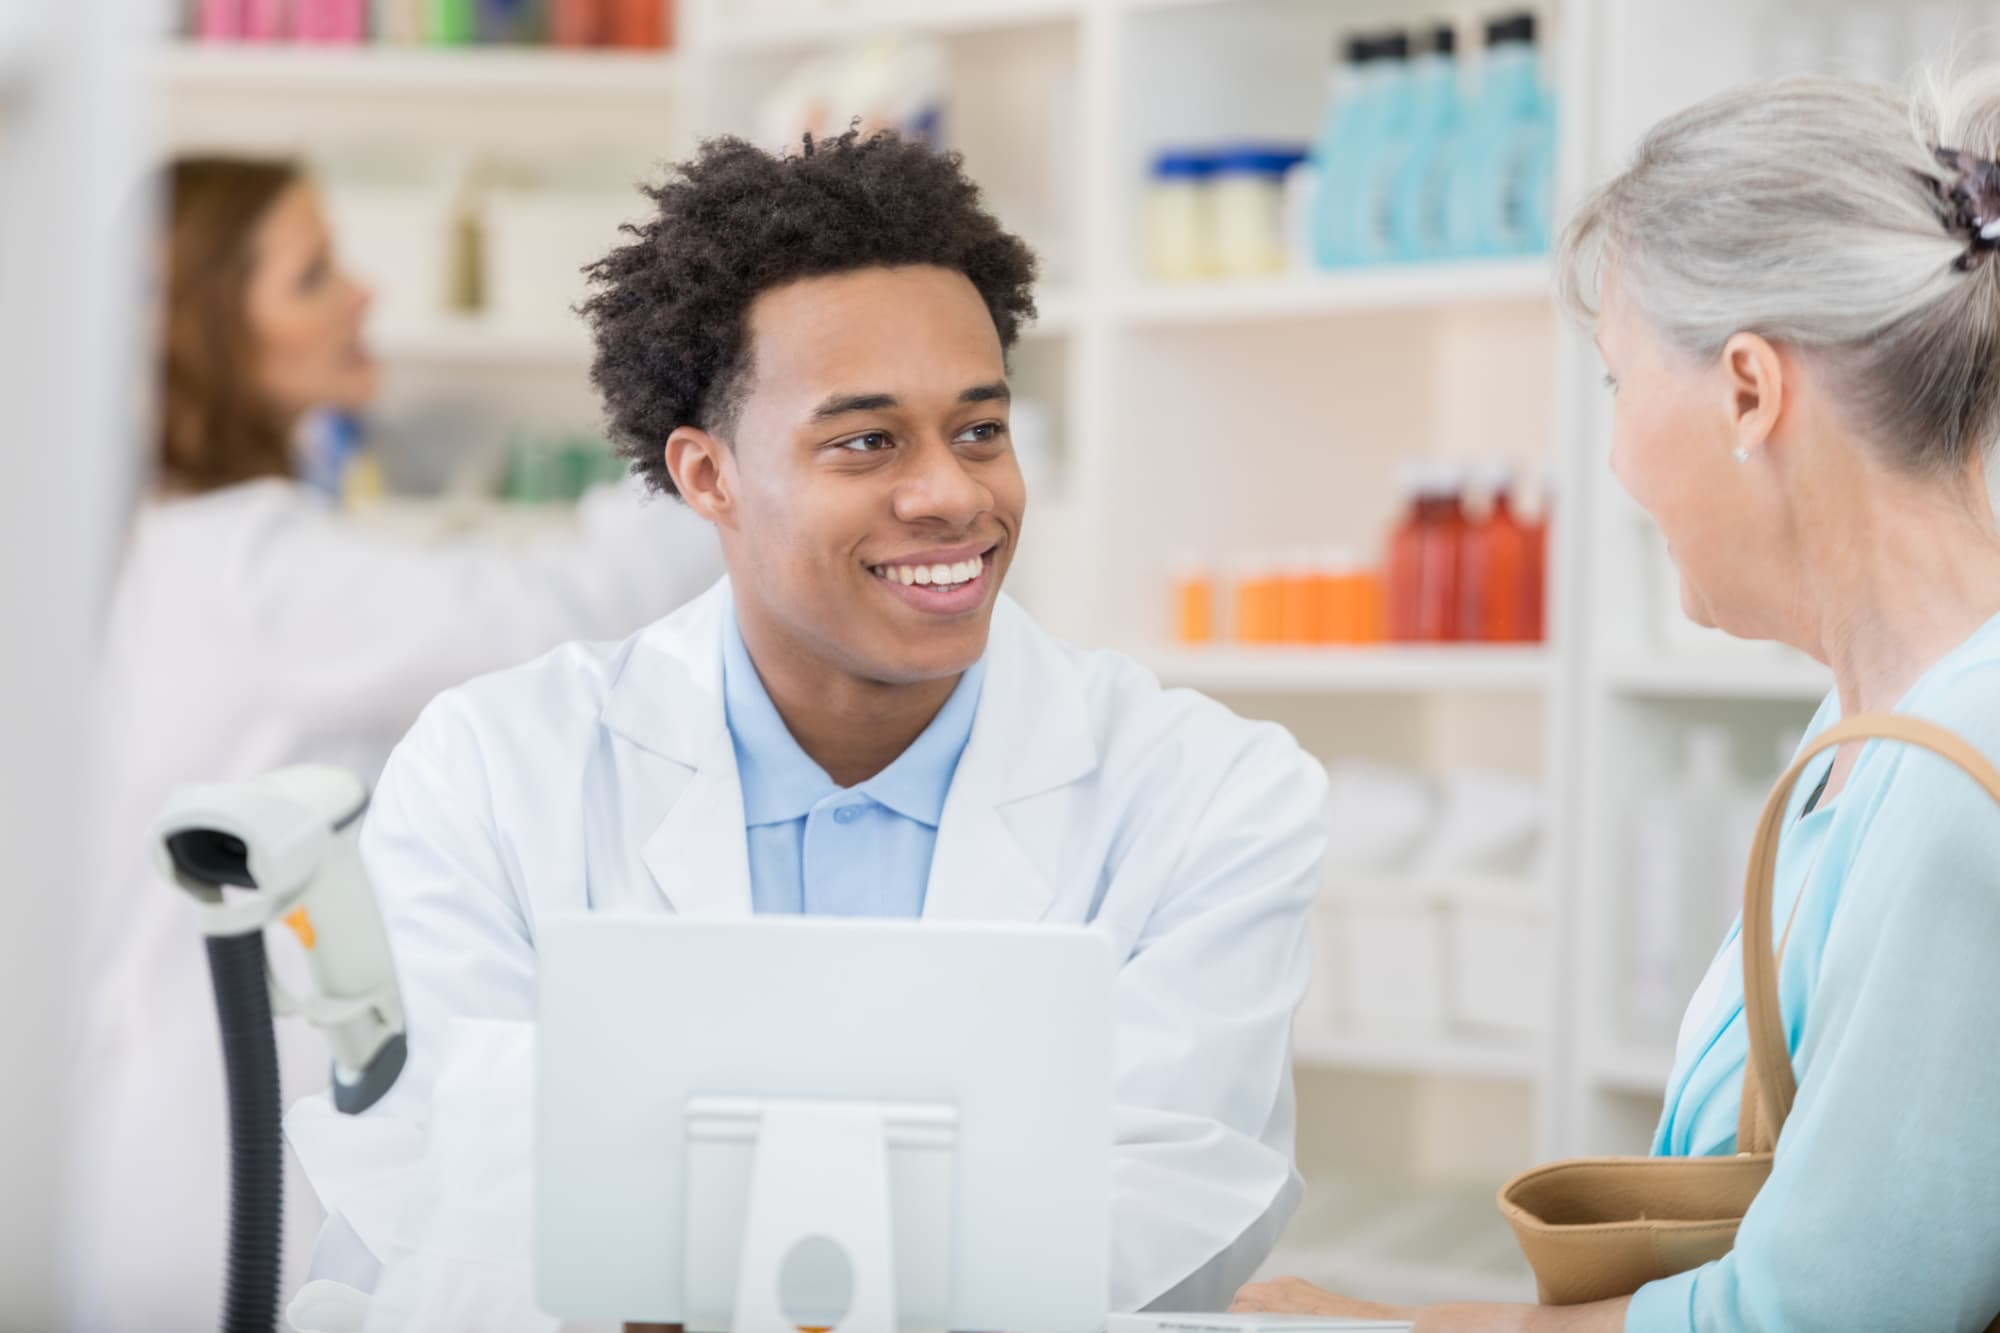 Pharmacy Technician vs. Pharmacist: What’s the Difference?